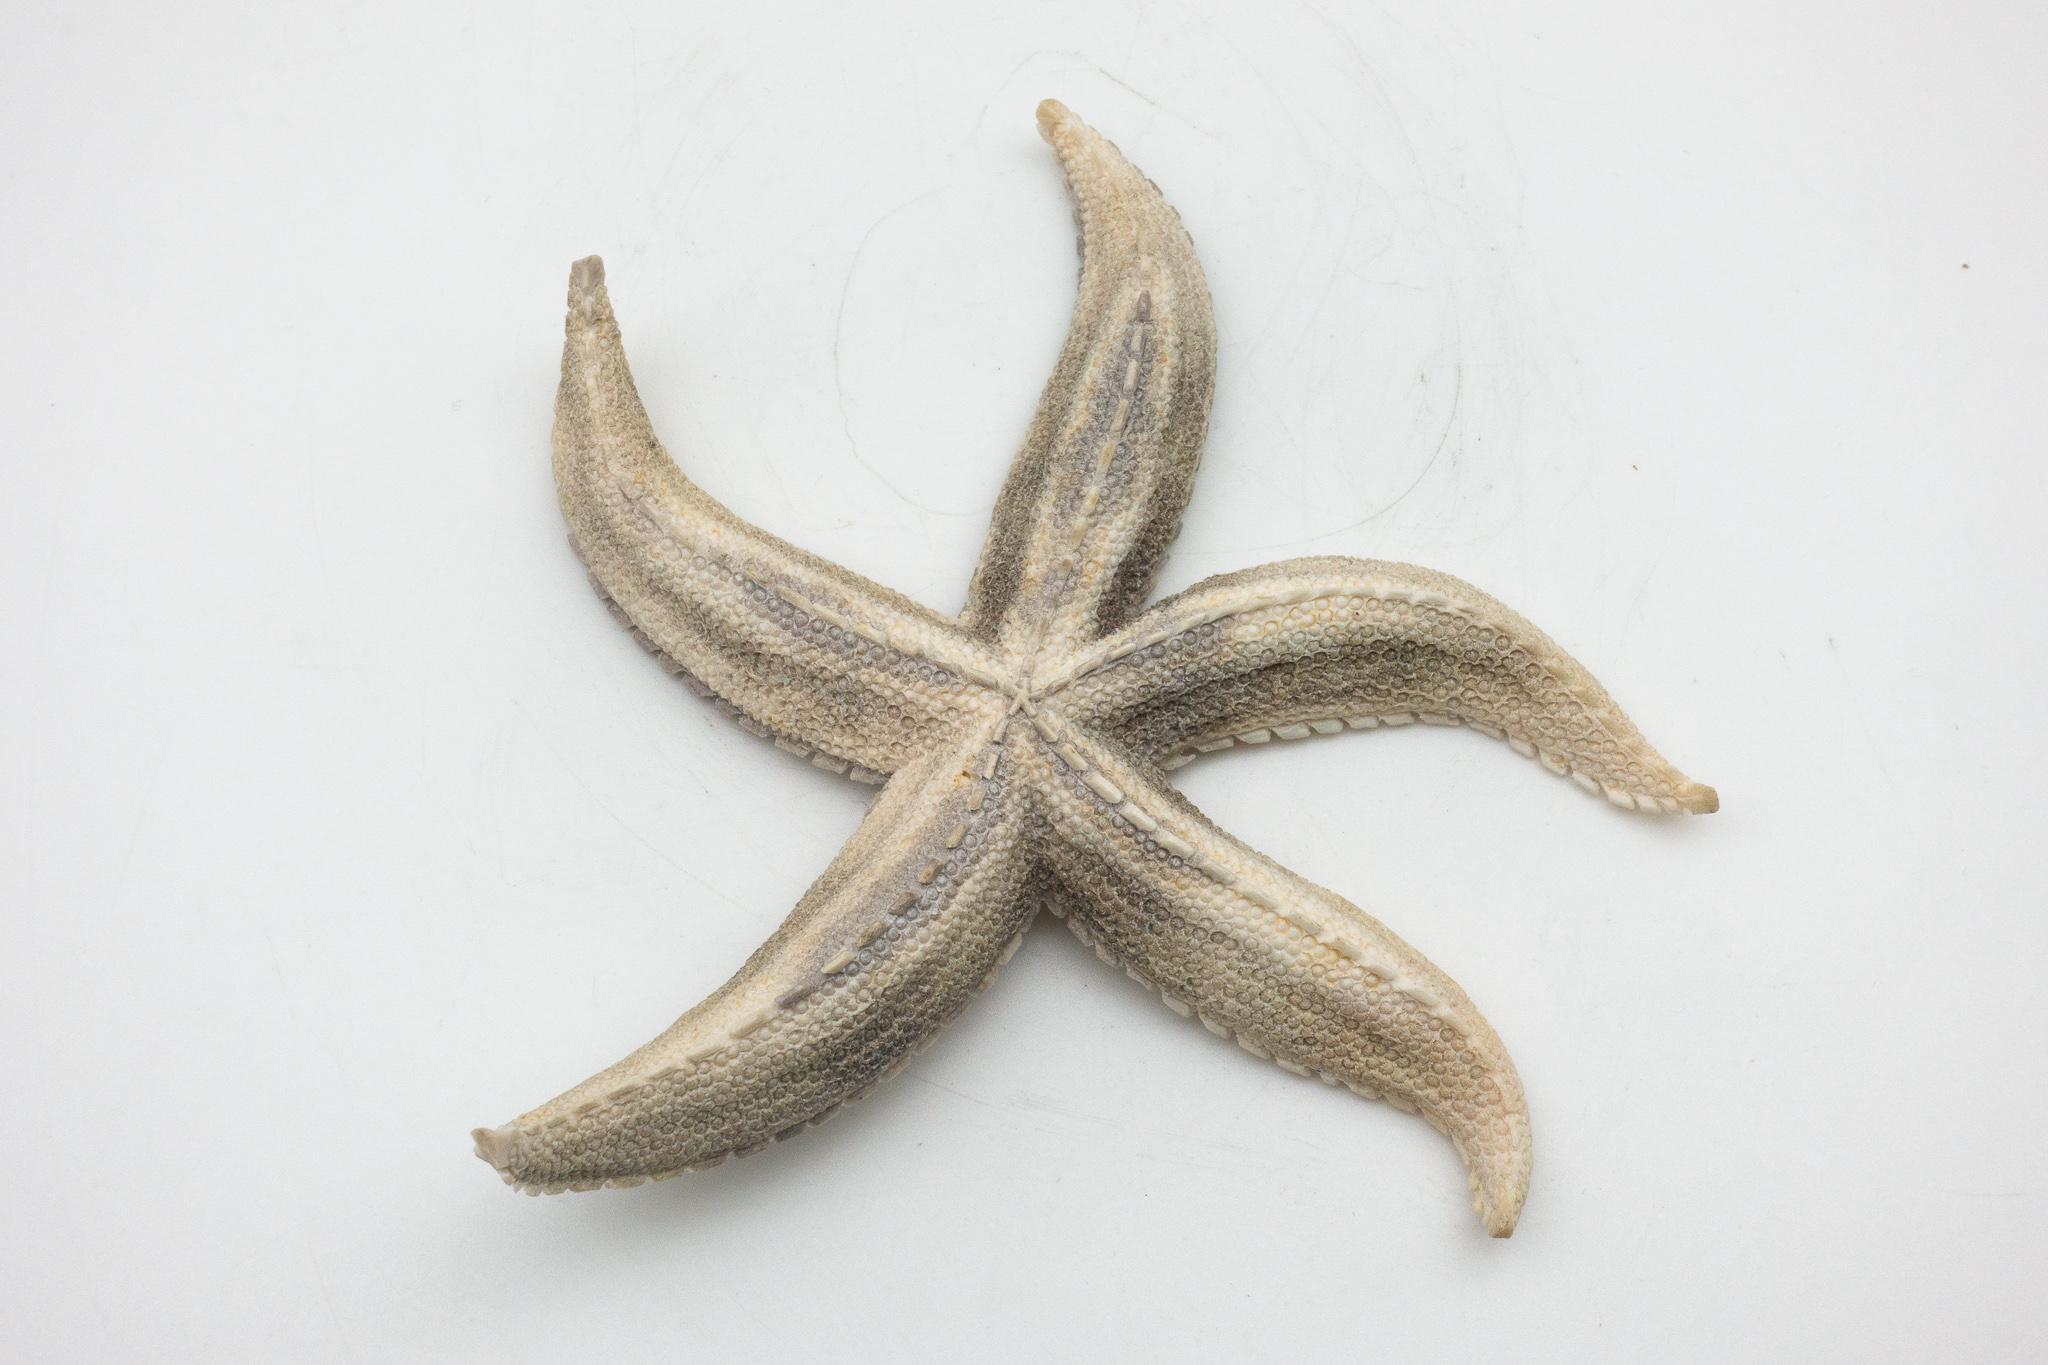 Contemporary Large North American Moose Antler Carving of Starfish